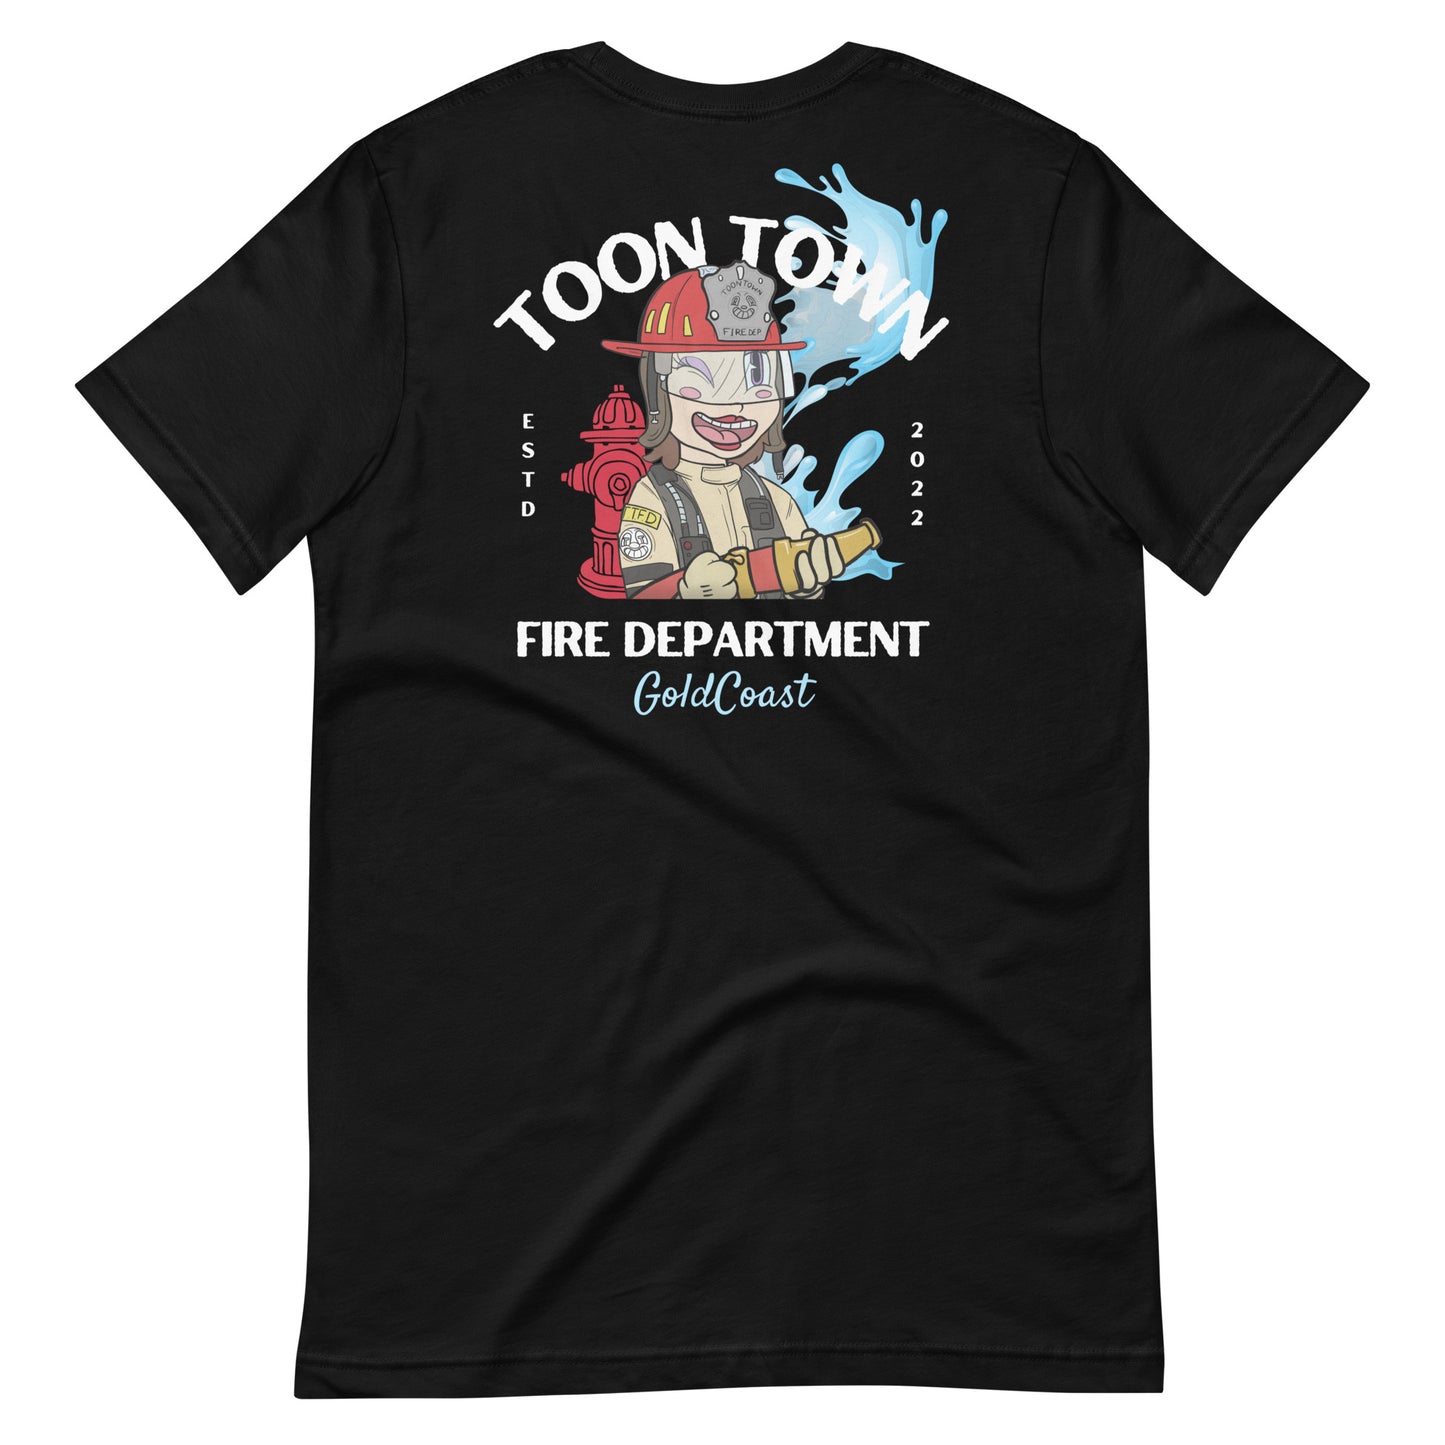 Toon Town Troublemakers - Fire Department Unisex T-Shirt